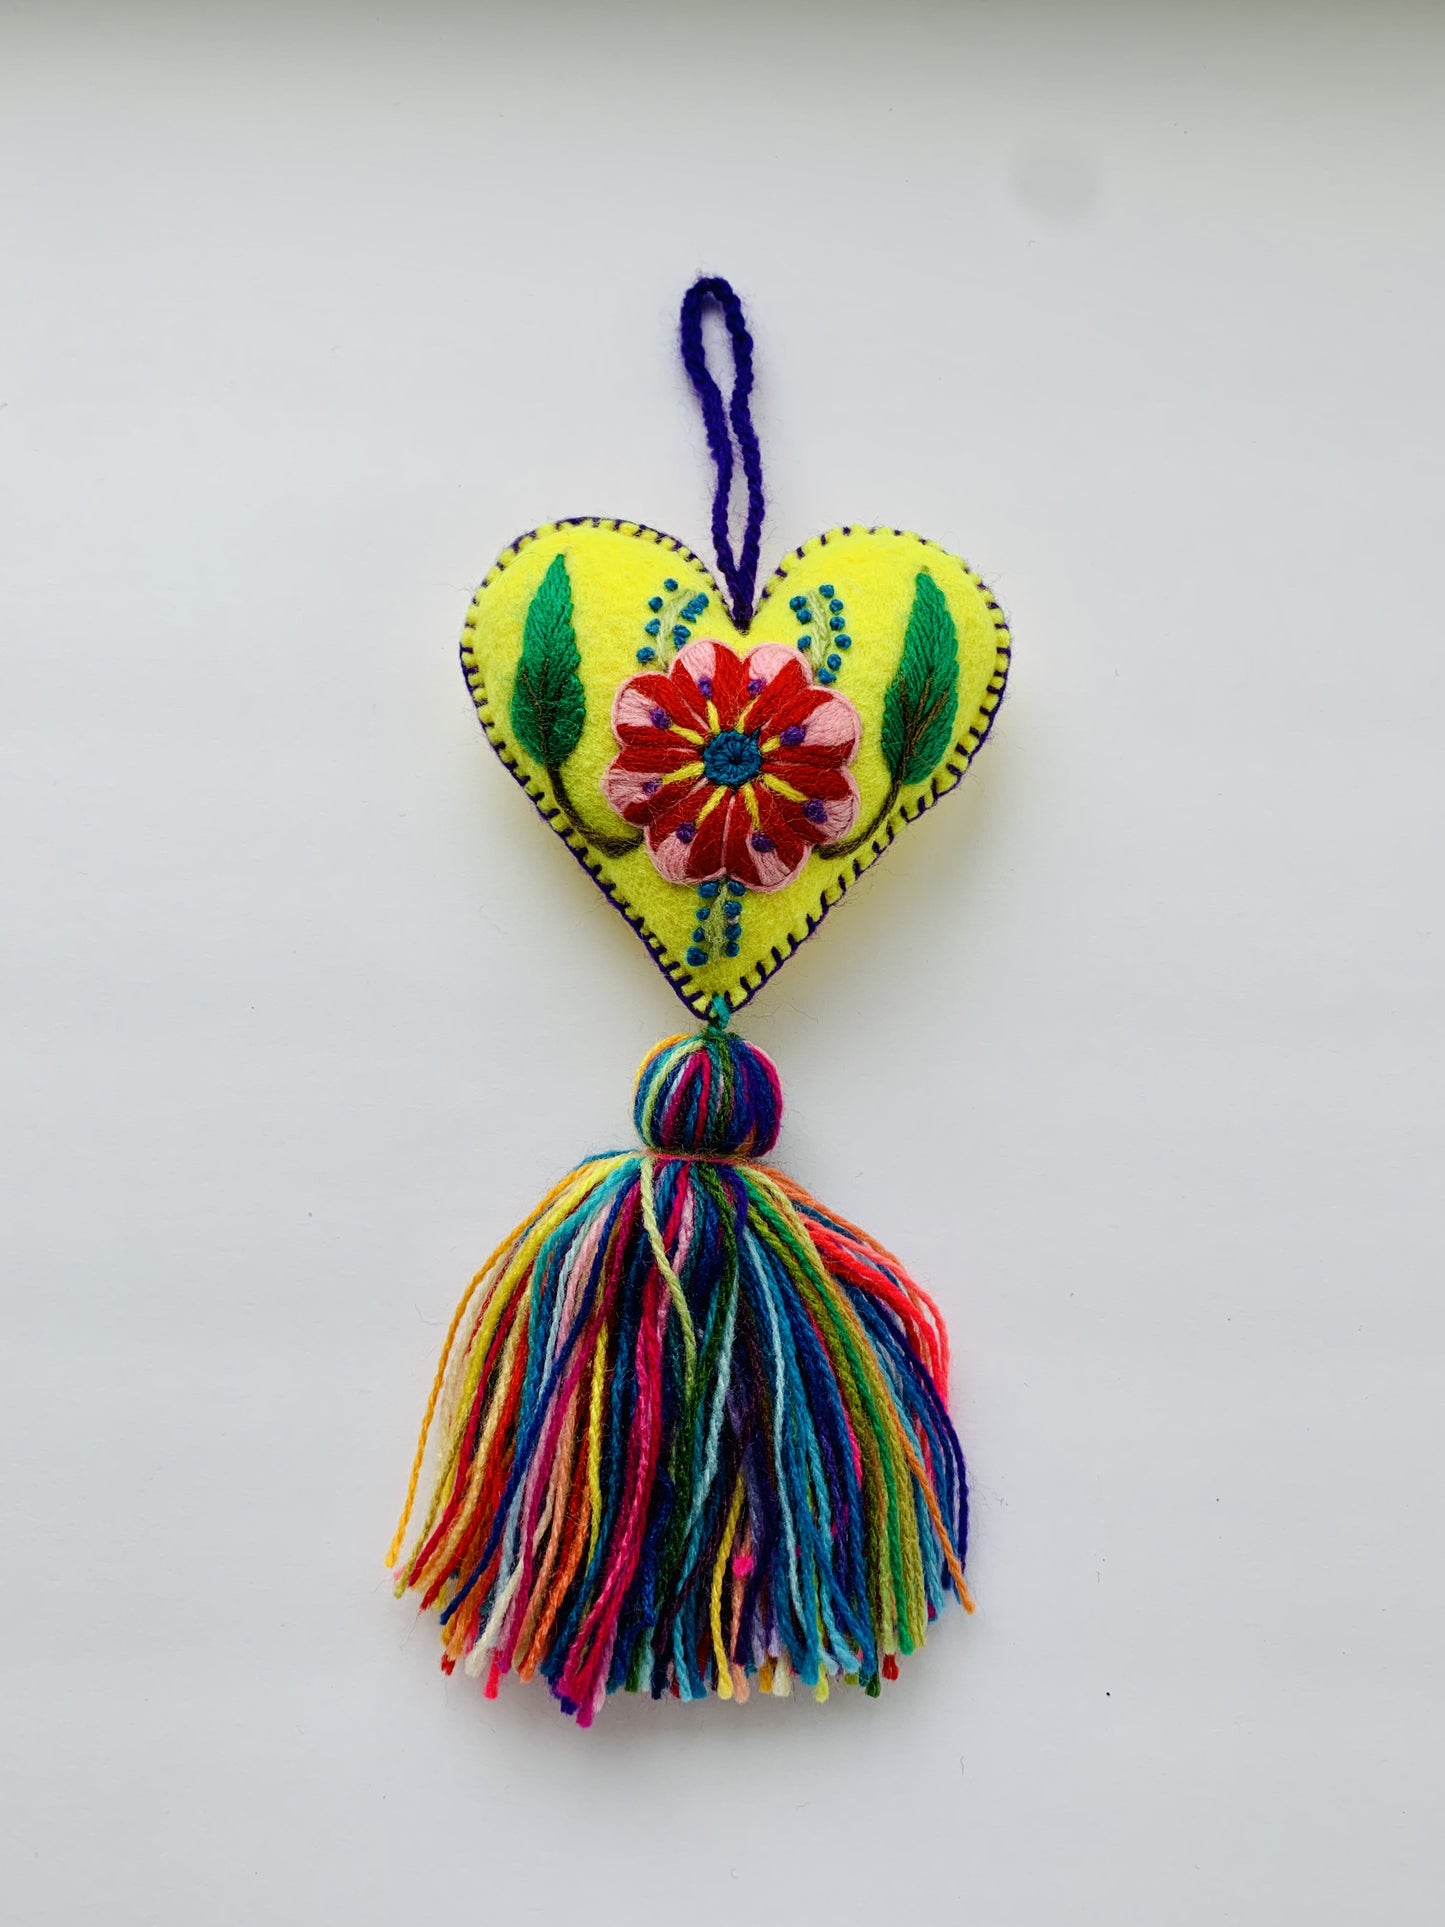 Embroidered wool heart ornament